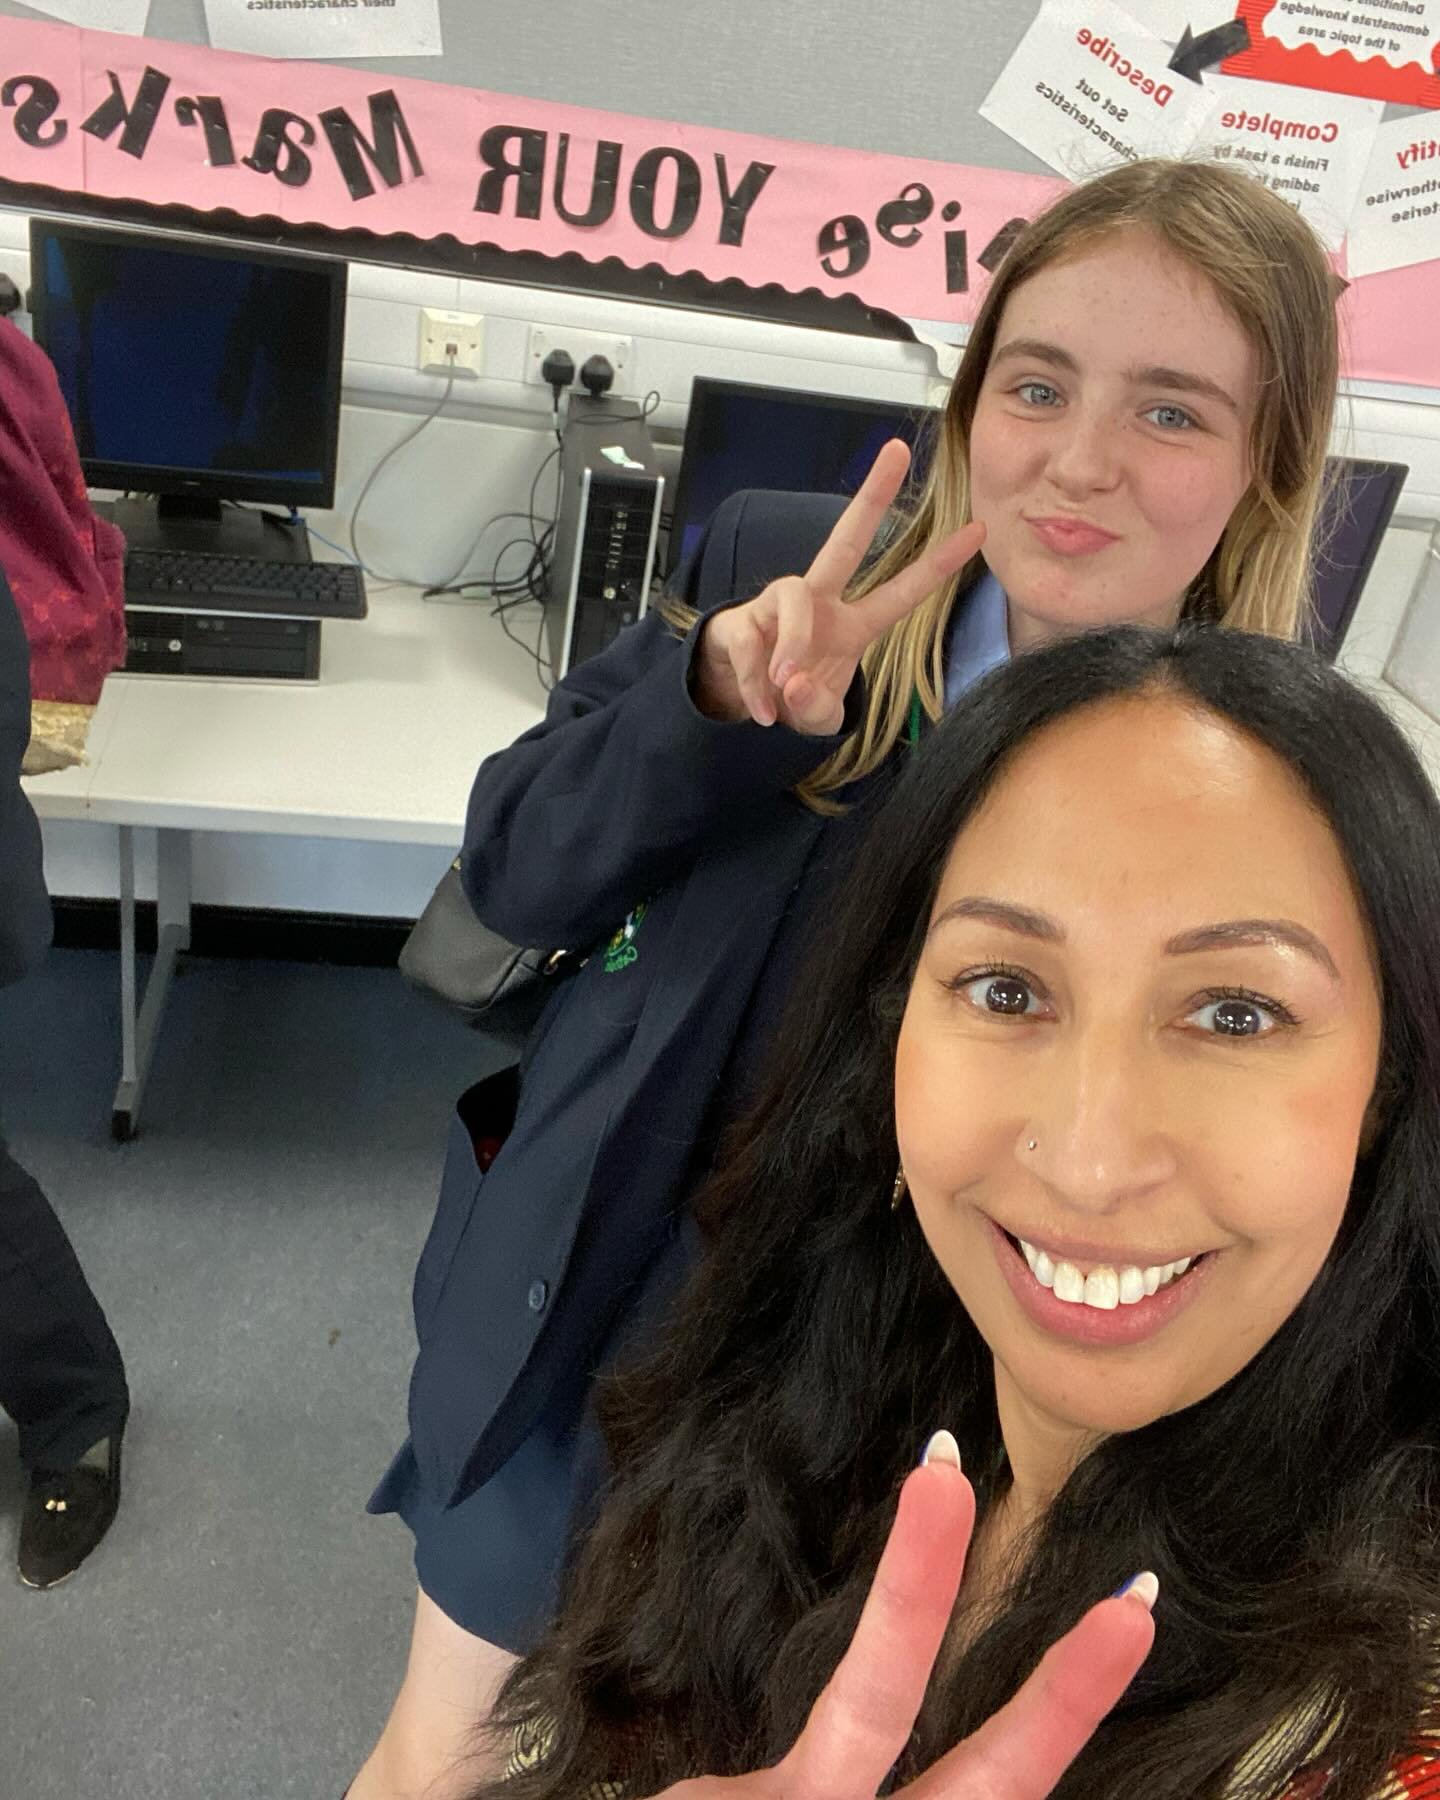 🌟 What a whirlwind of creativity and inspiration! Hosting a 6-day pop-up digital news agency at Our Lady&rsquo;s Catholic College in Lancaster has been an absolute delight. 

A huge shoutout to Digital Advantage for the opportunity to engage with su